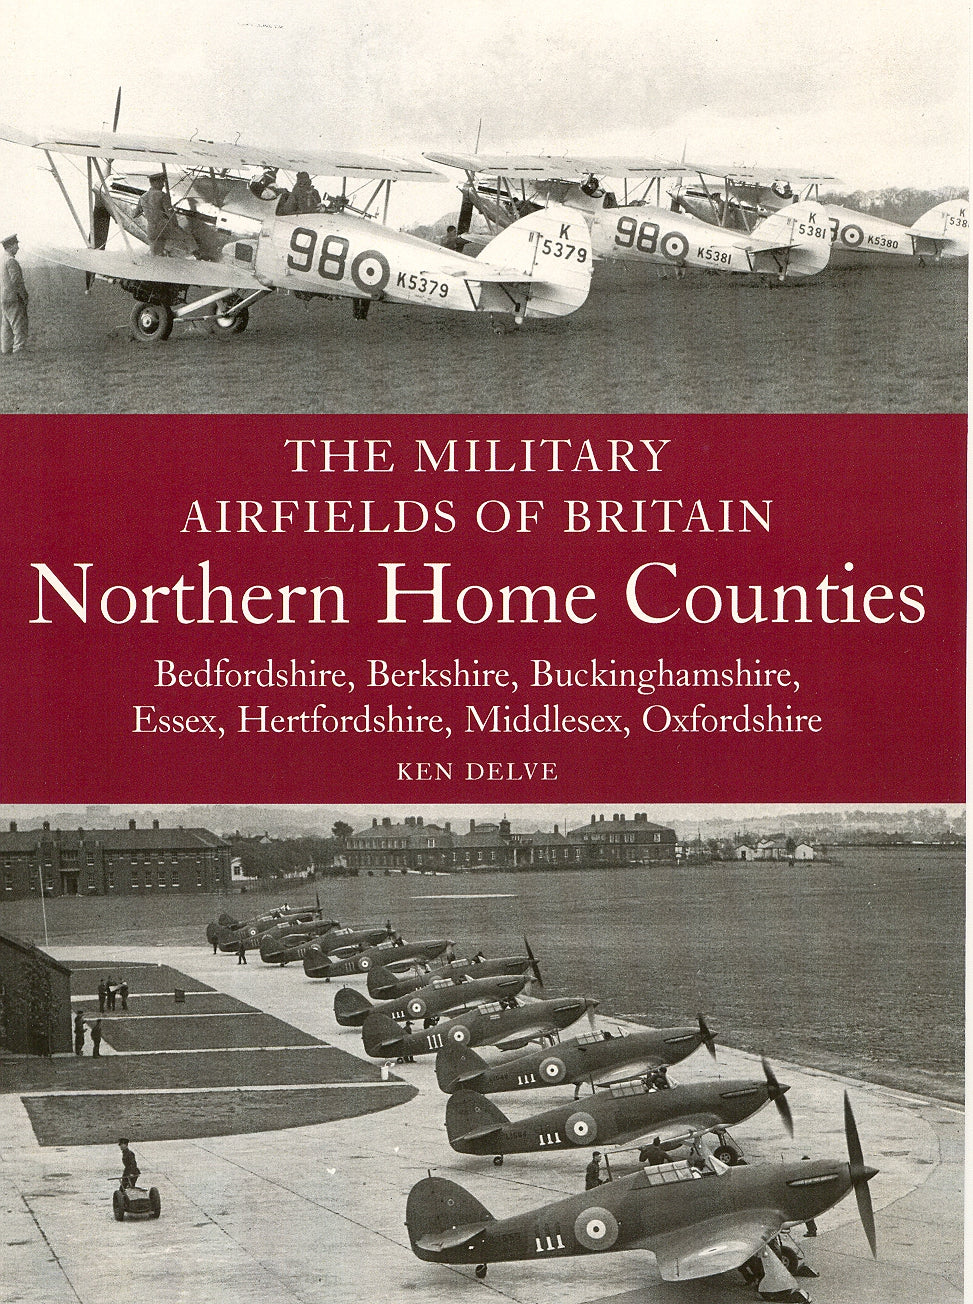 The Military Airfields of Britain: Northern Home Counties (Bedfordshire&#44; Berkshire&#44; Buckinghamshire&#44; Essex&#44; Hertfordshire&#44; Middlesex&#44; Oxfordshire)